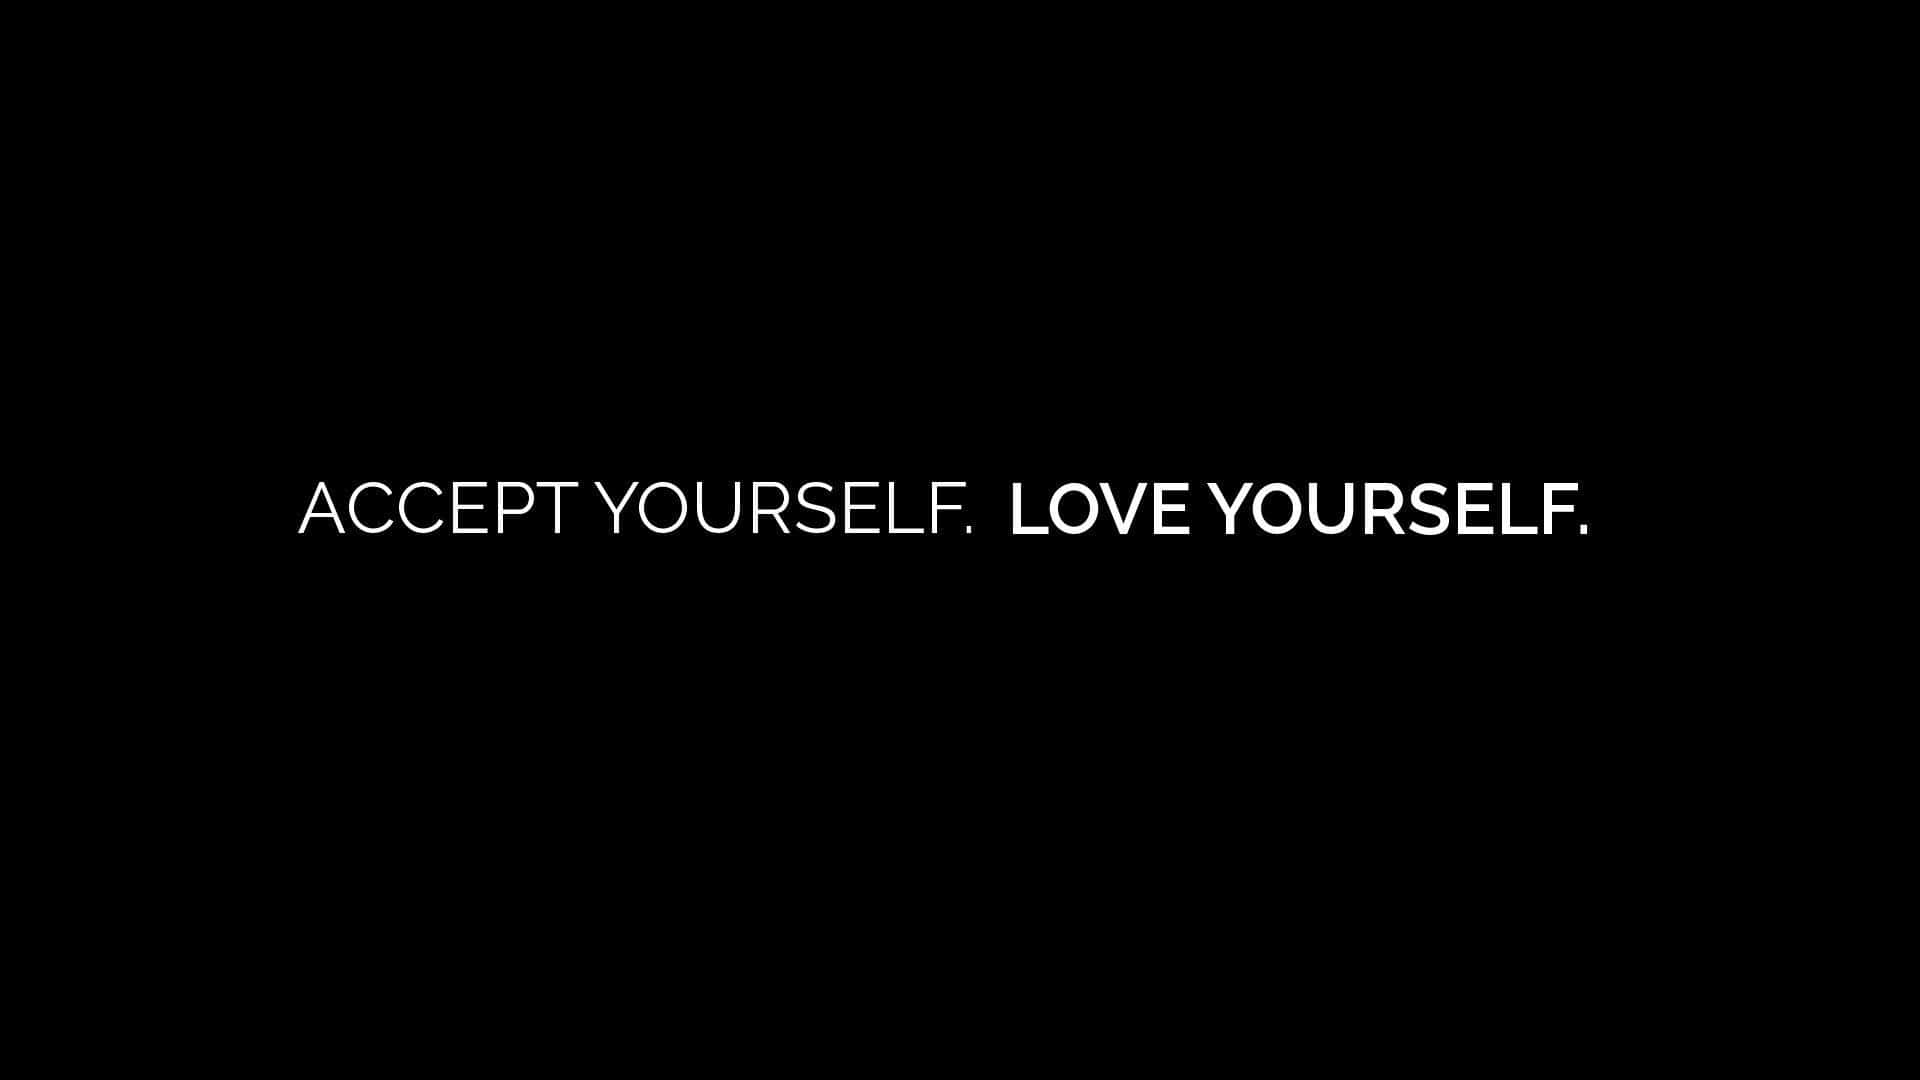 Embrace Your Essence - Love Yourself Wallpaper